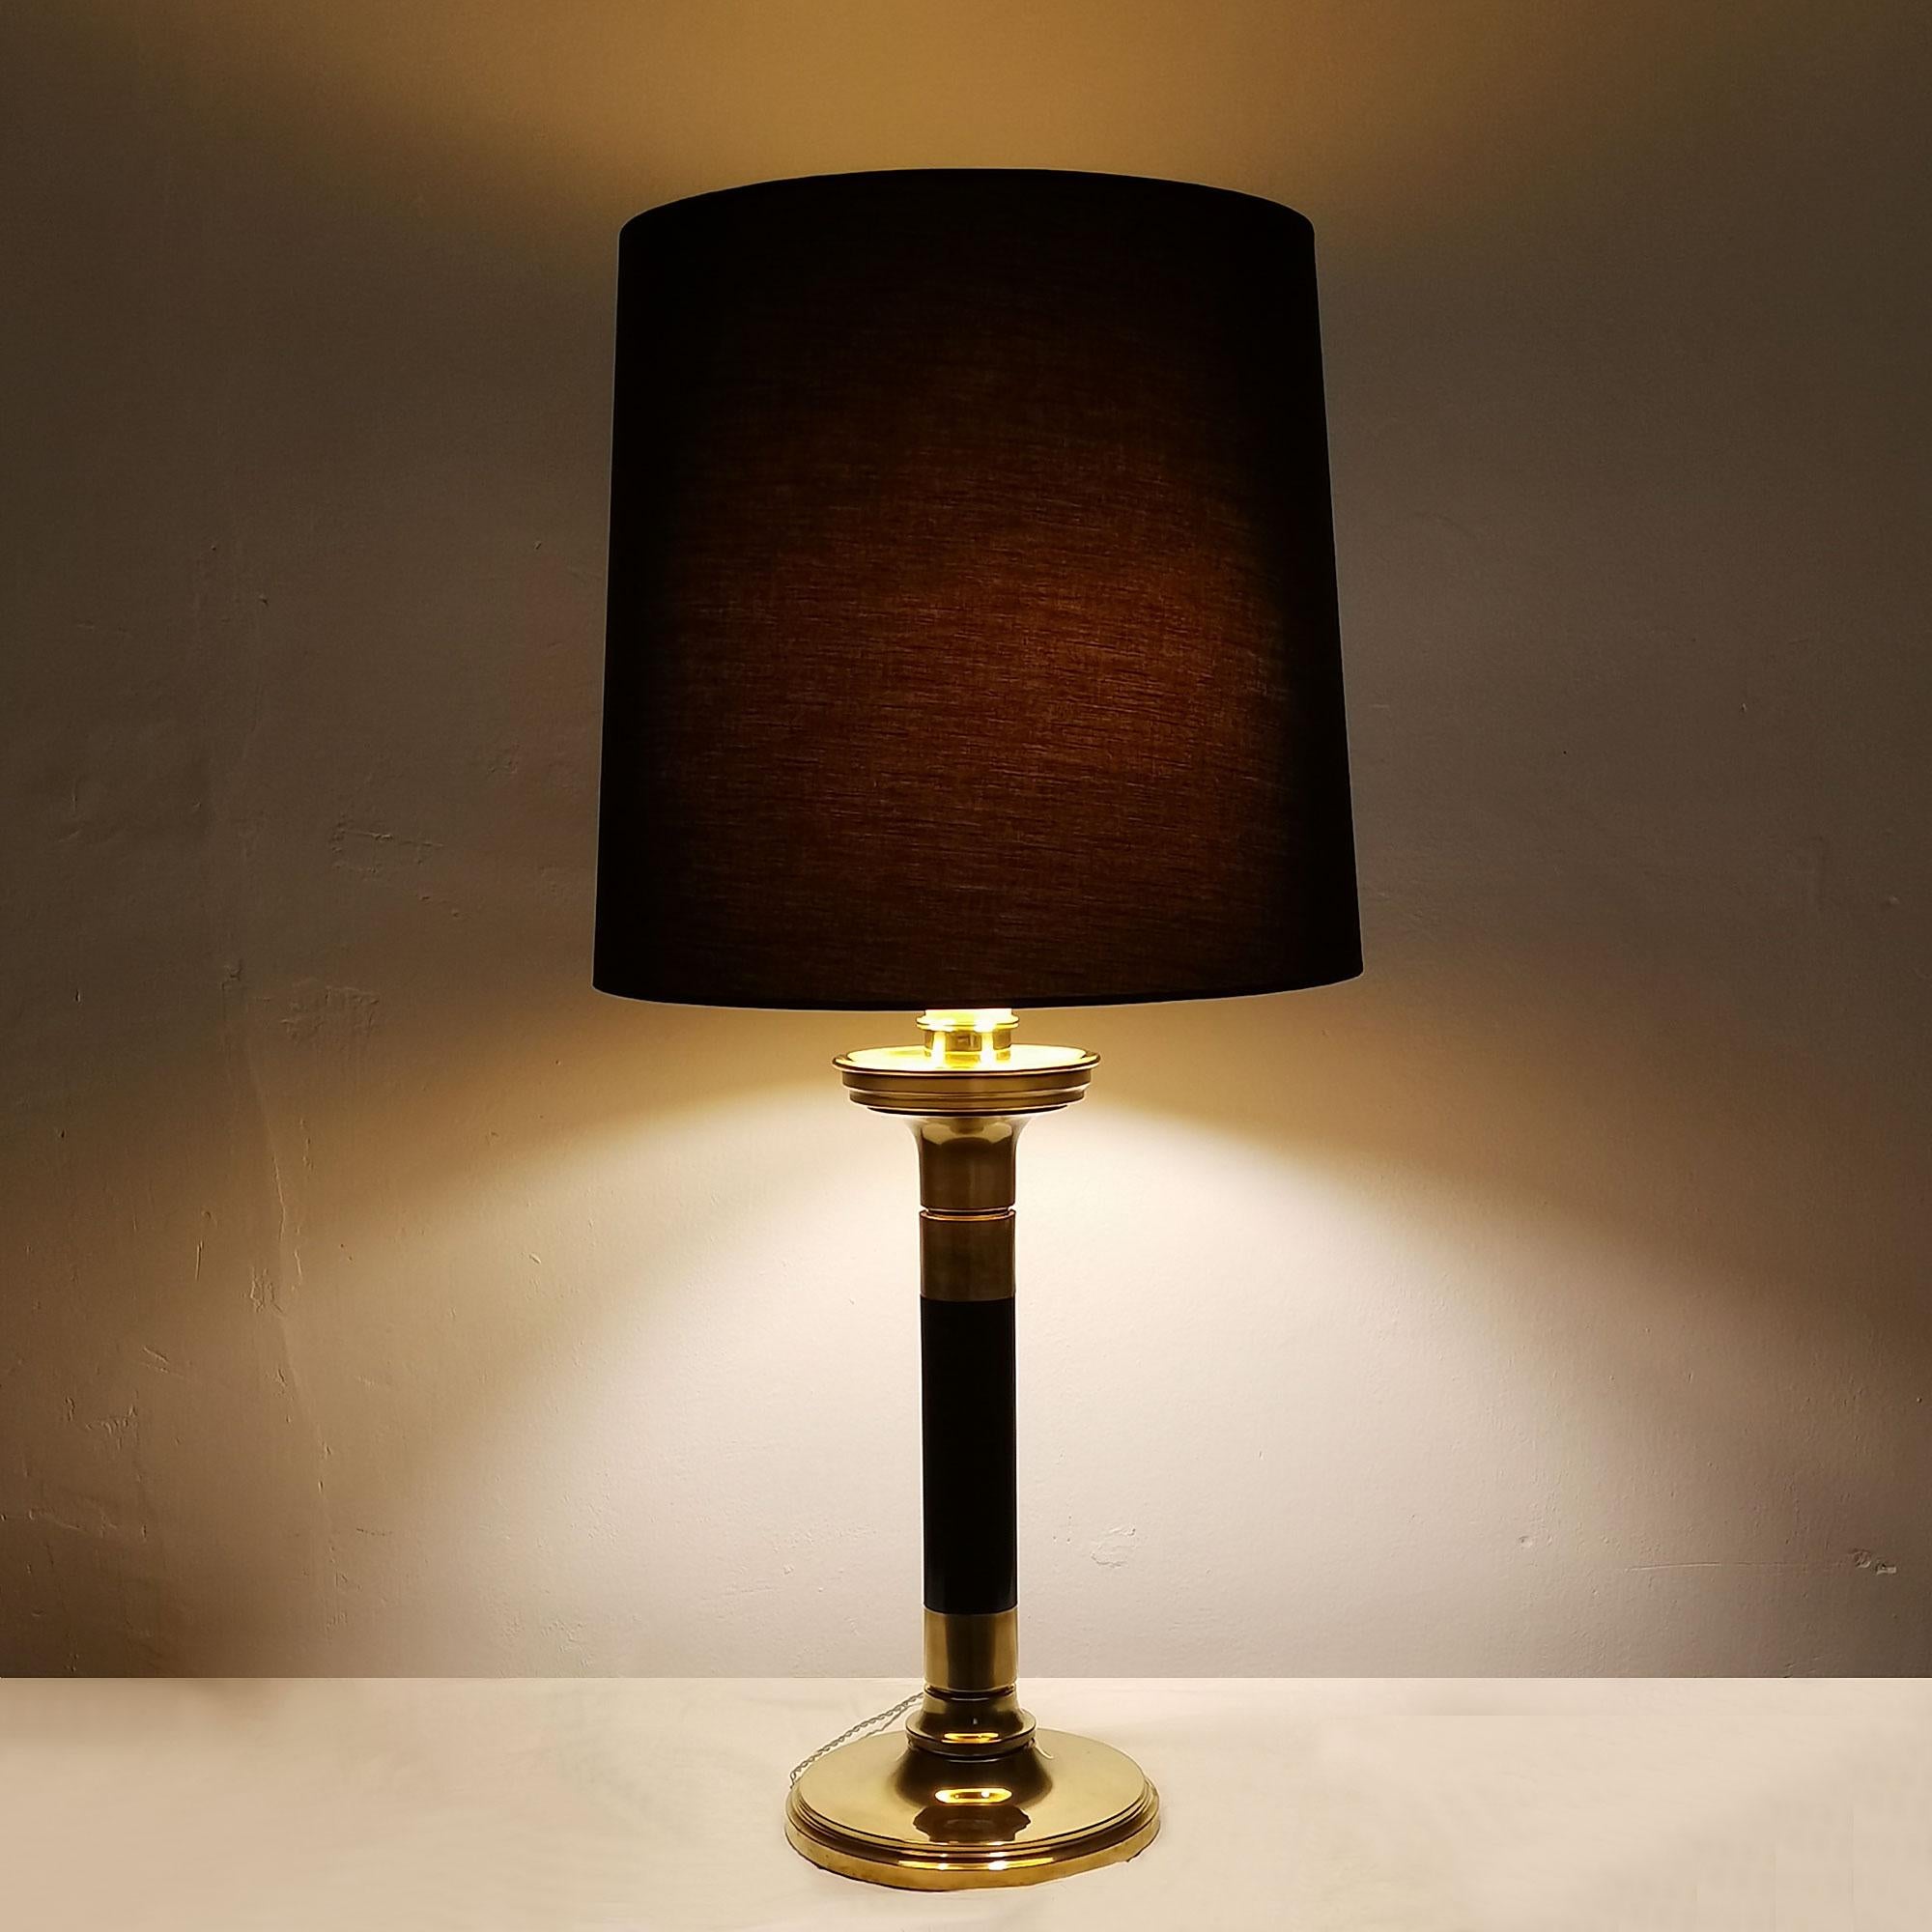 Pair of Mid-Century Modern Table Lamps by Clar, Mahogany and Brass - Barcelona For Sale 3